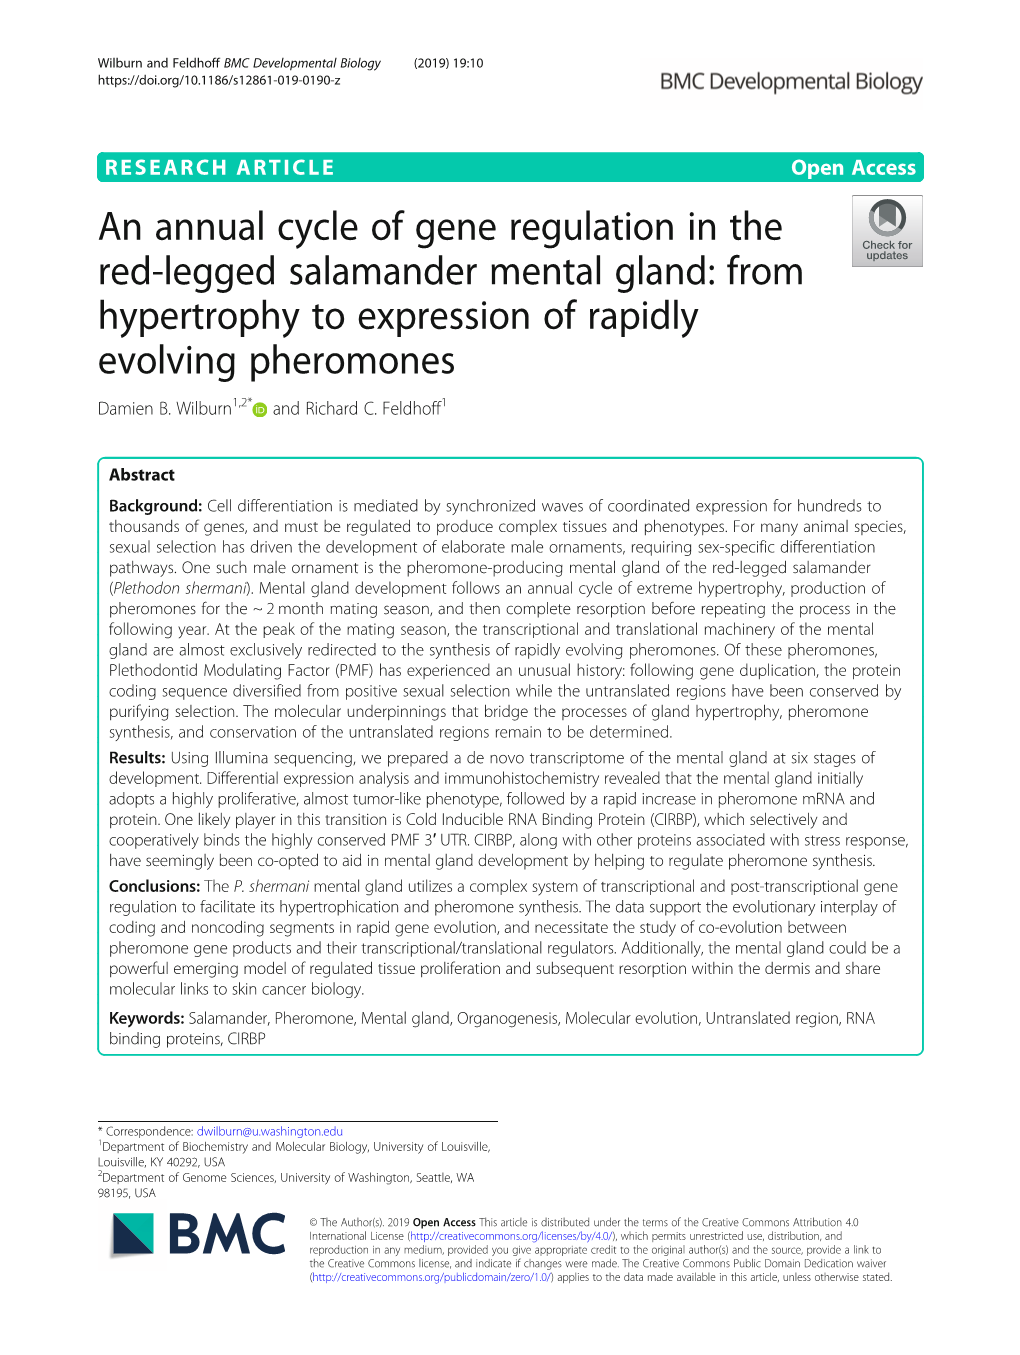 An Annual Cycle of Gene Regulation in the Red-Legged Salamander Mental Gland: from Hypertrophy to Expression of Rapidly Evolving Pheromones Damien B